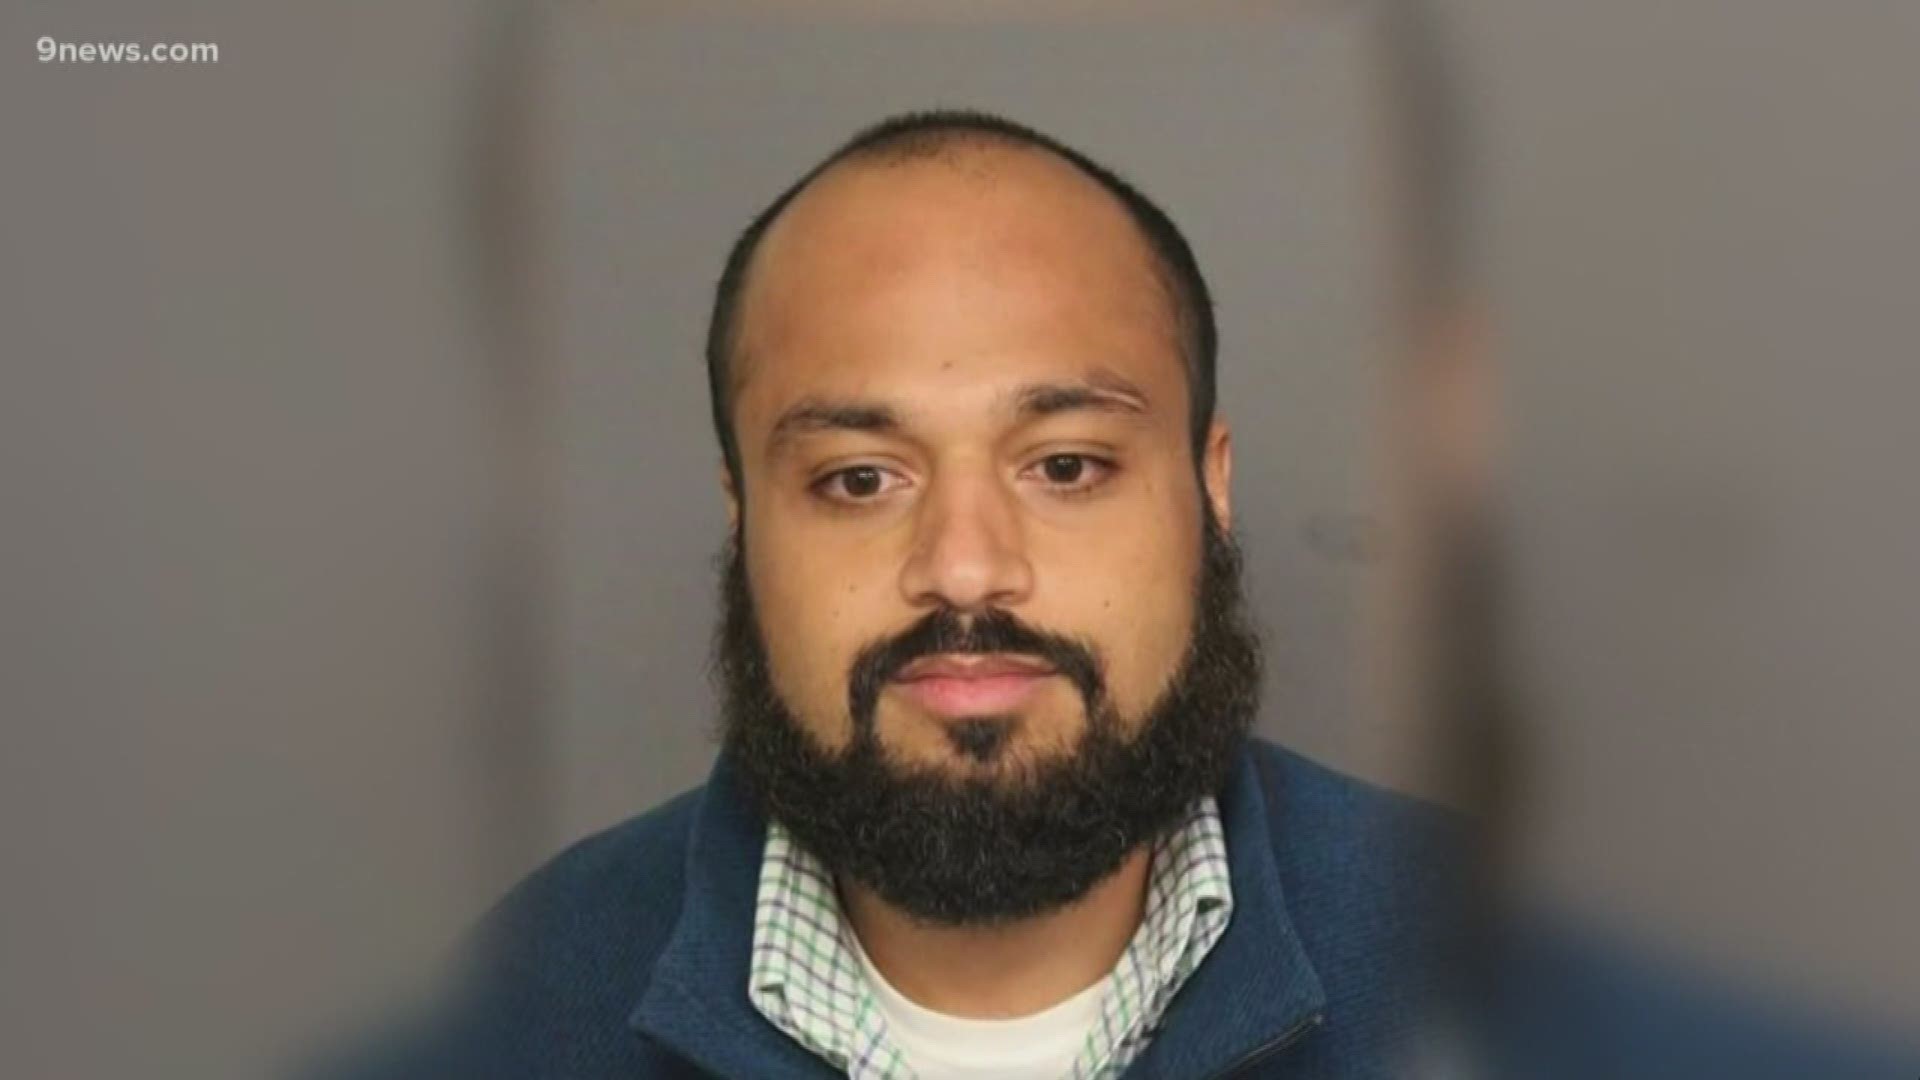 Tushar Rae has a preliminary hearing in Arapahoe County Monday afternoon. He's charged with assault, carrying a concealed weapon, and having a weapon on school grounds.